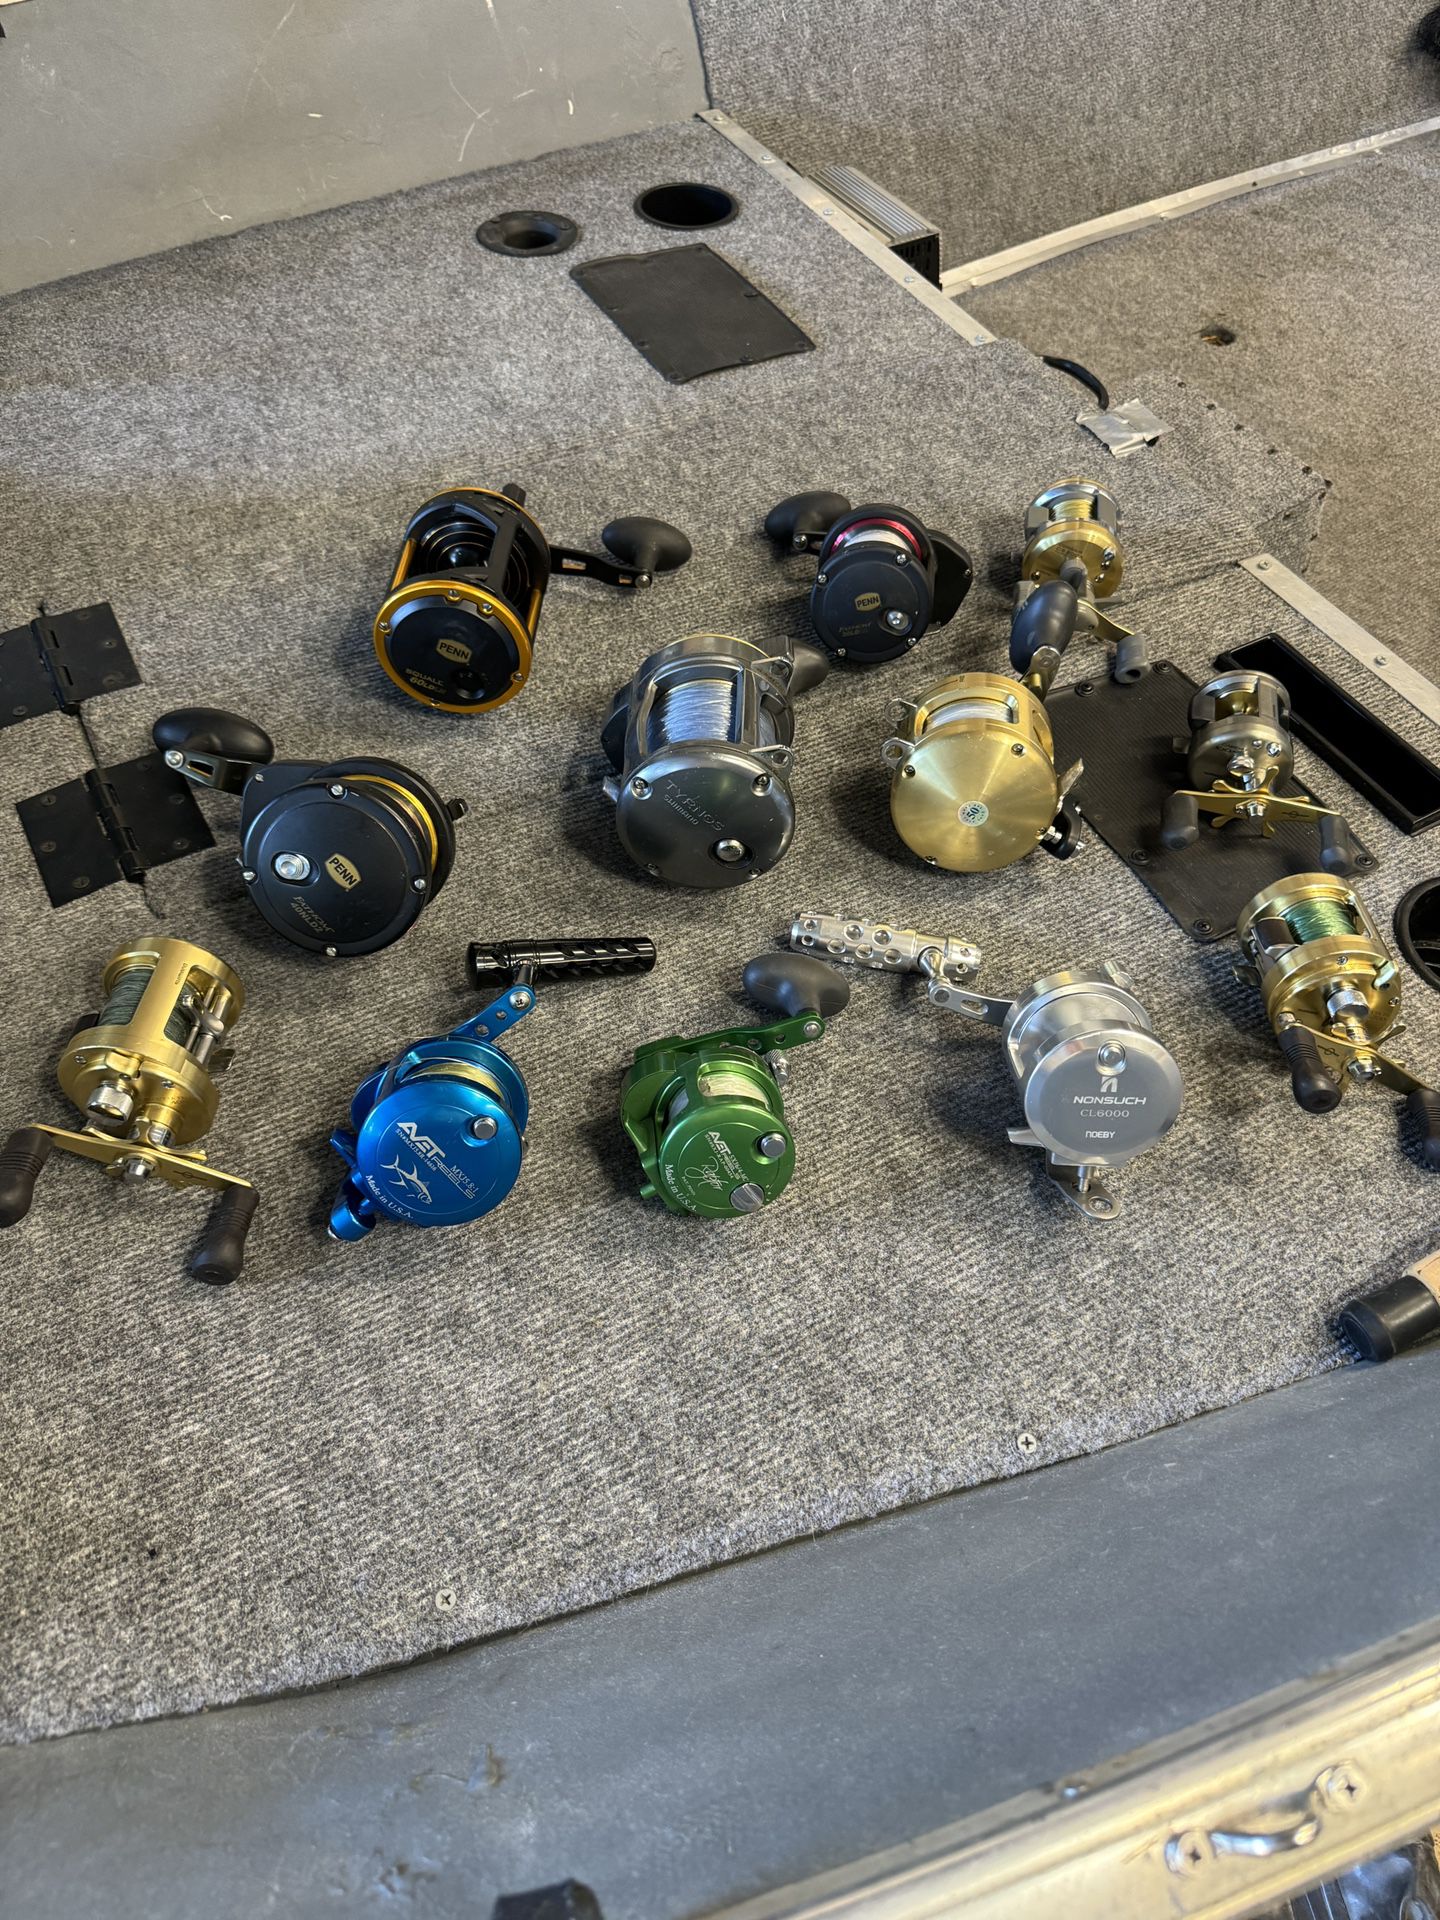 Ocean Reels Murrieta Temecula  Area. See Pick For Pricing. No Low Offers. Waste Of Time. 